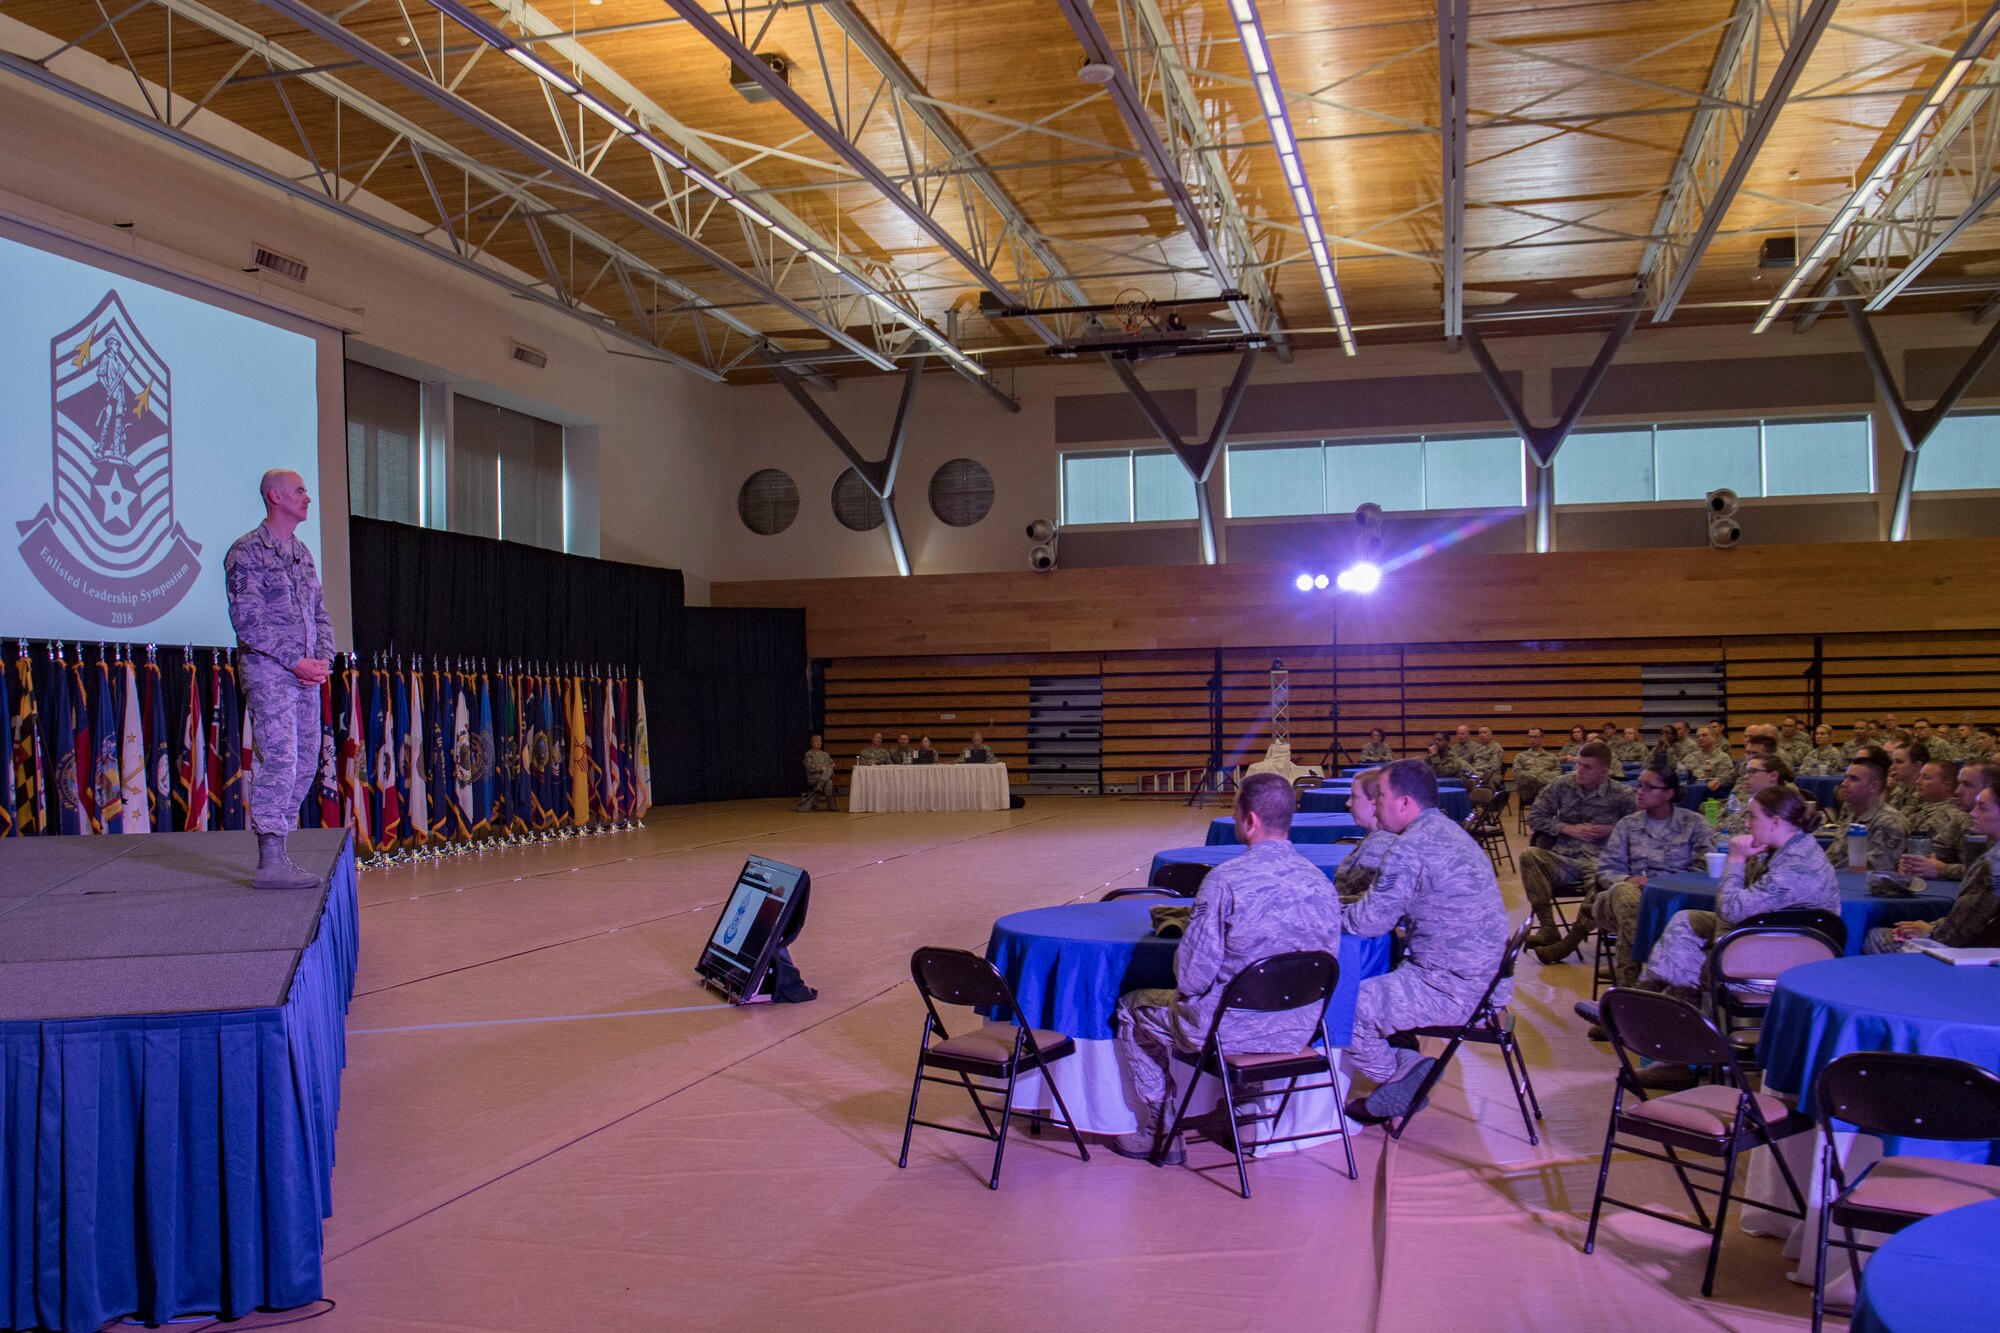 Chief Master Sgt. Ronald Anderson, the Command Chief Master Sgt. of the Air National Guard, gives a speech at the final day of the Enlisted Leadership Symposium (ELS) August 17, 2018 at Camp Dawson, W.Va. More than 400 Airmen representing Air National Guard units from each state and territory attended the ELS, a three-day event focused on leadership and professional development. (U.S. Air National Guard Photo by Airman 1st Class Caleb Vance)